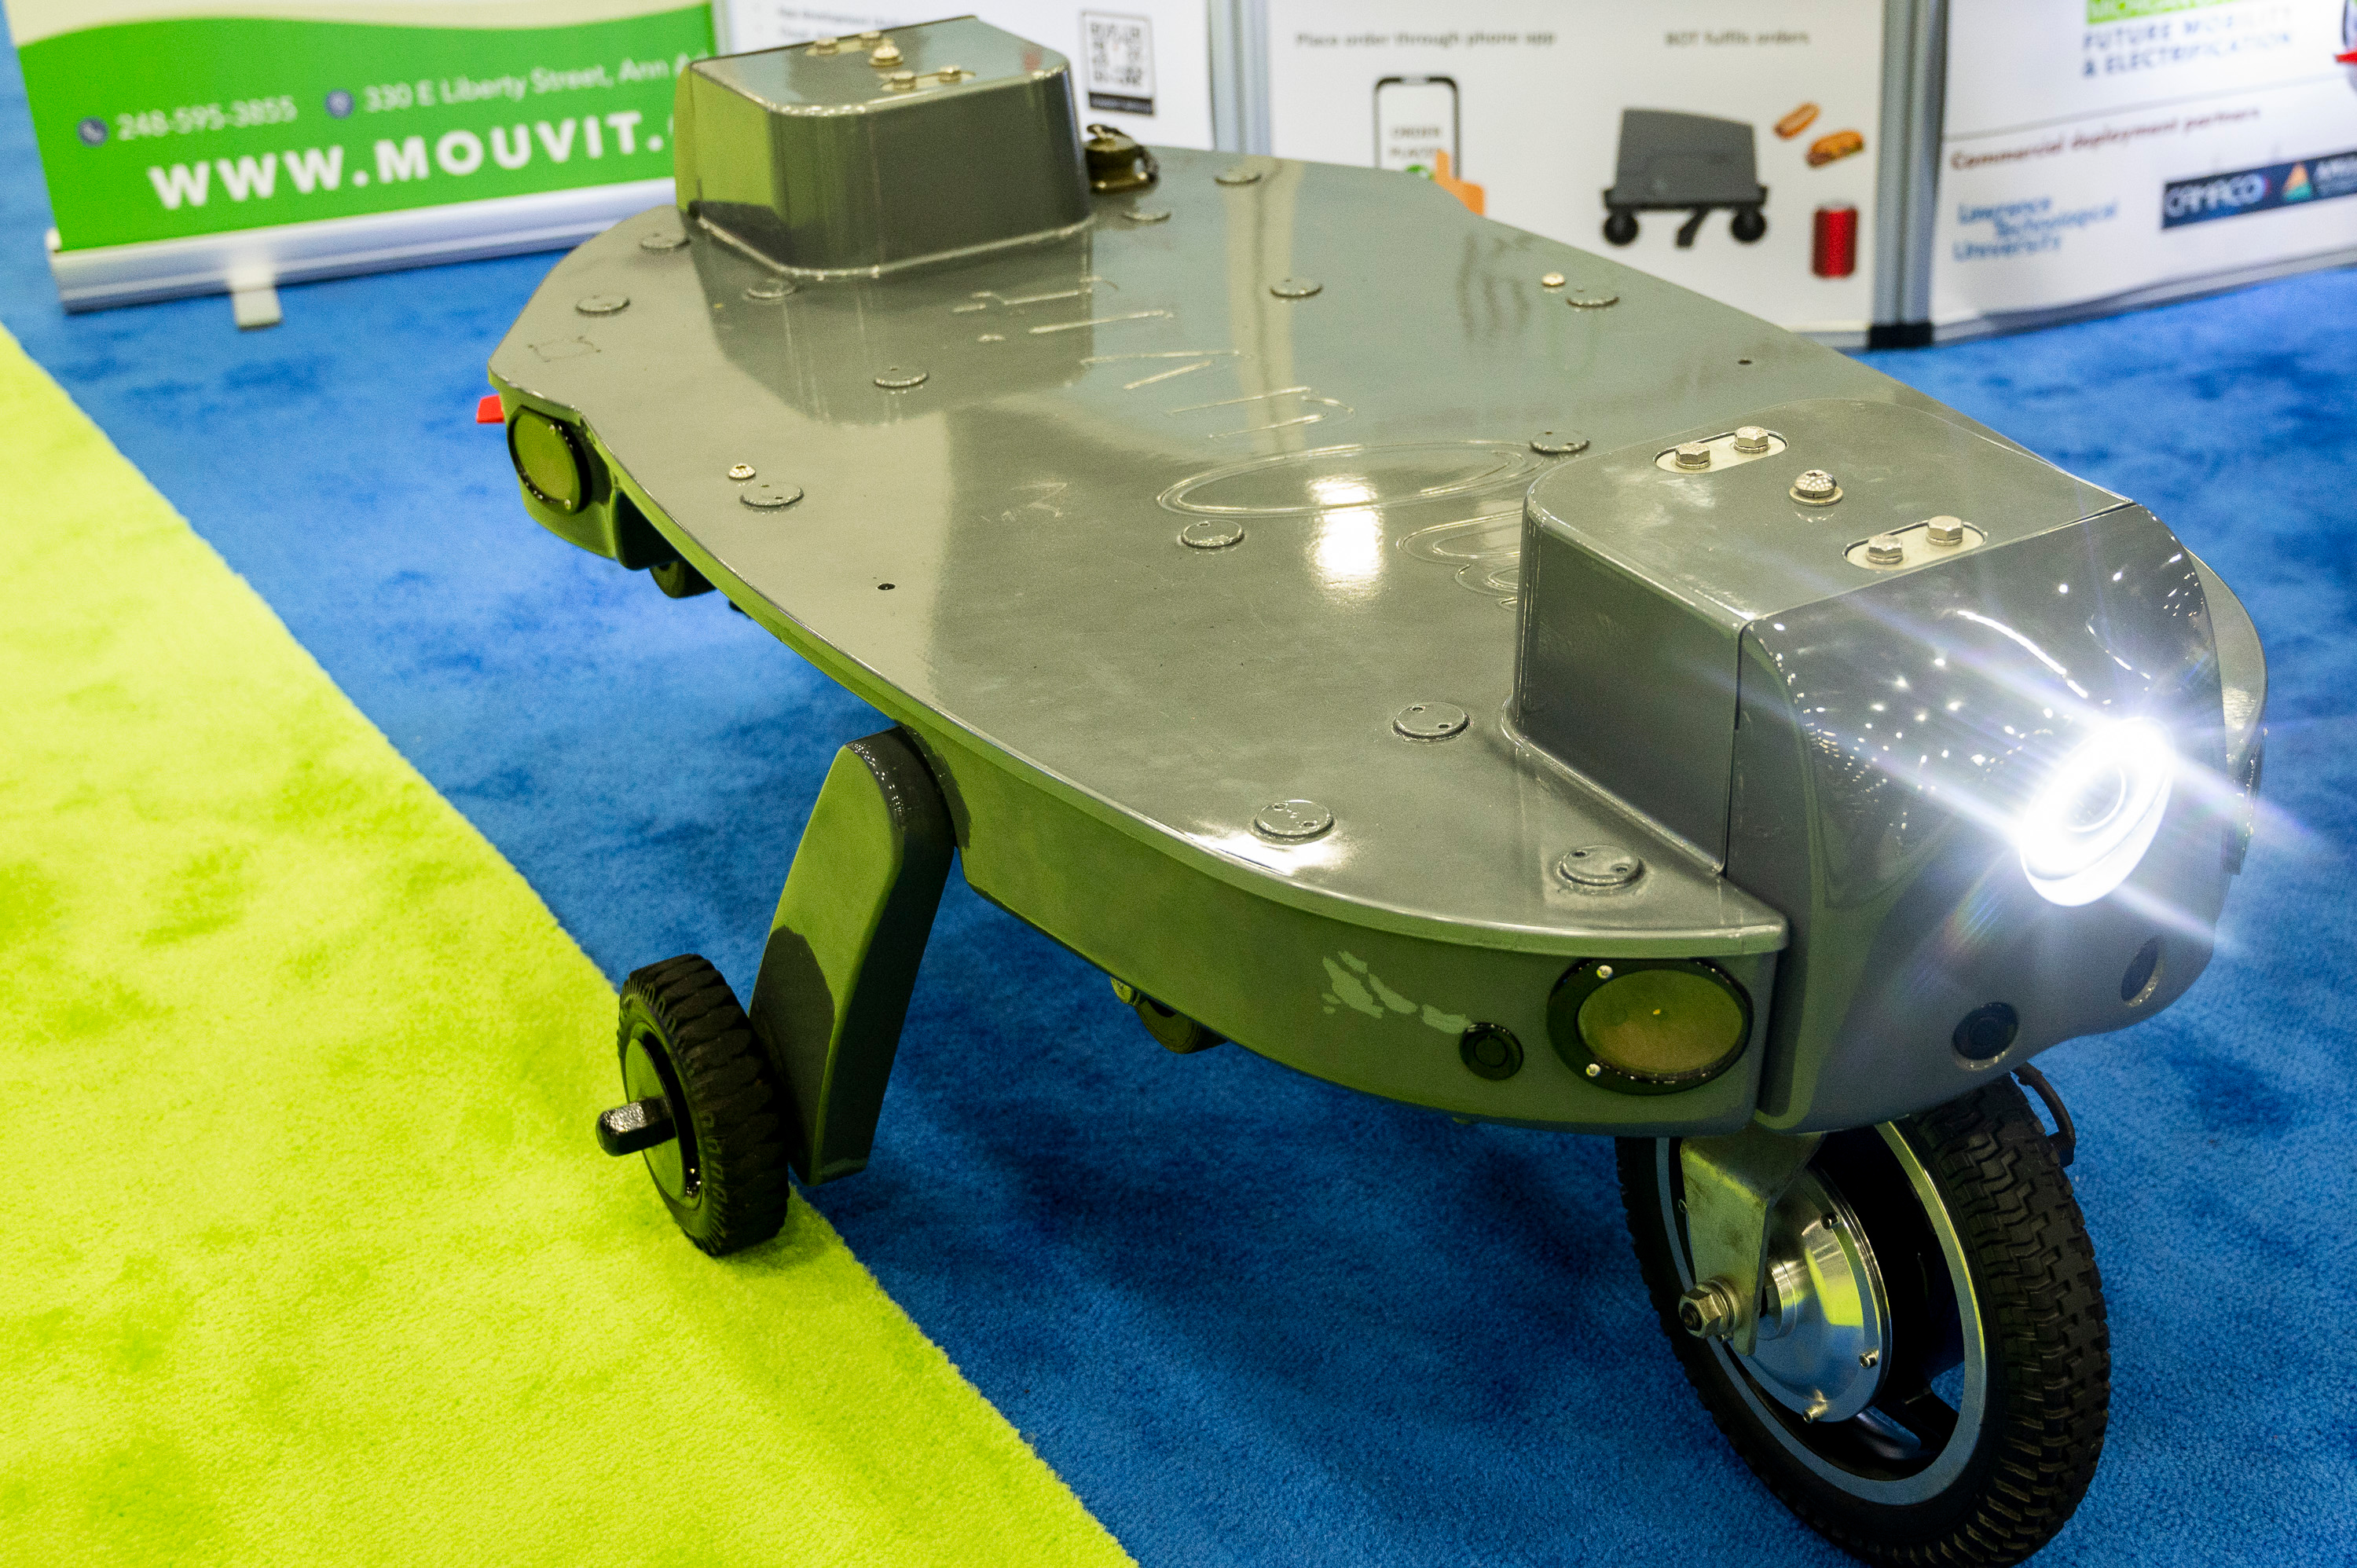 Mouvit autonomous food delivery vehicles on display during the 2022 North American International Auto Show at Huntington Place in Detroit on Wednesday, Sept. 14 2022.